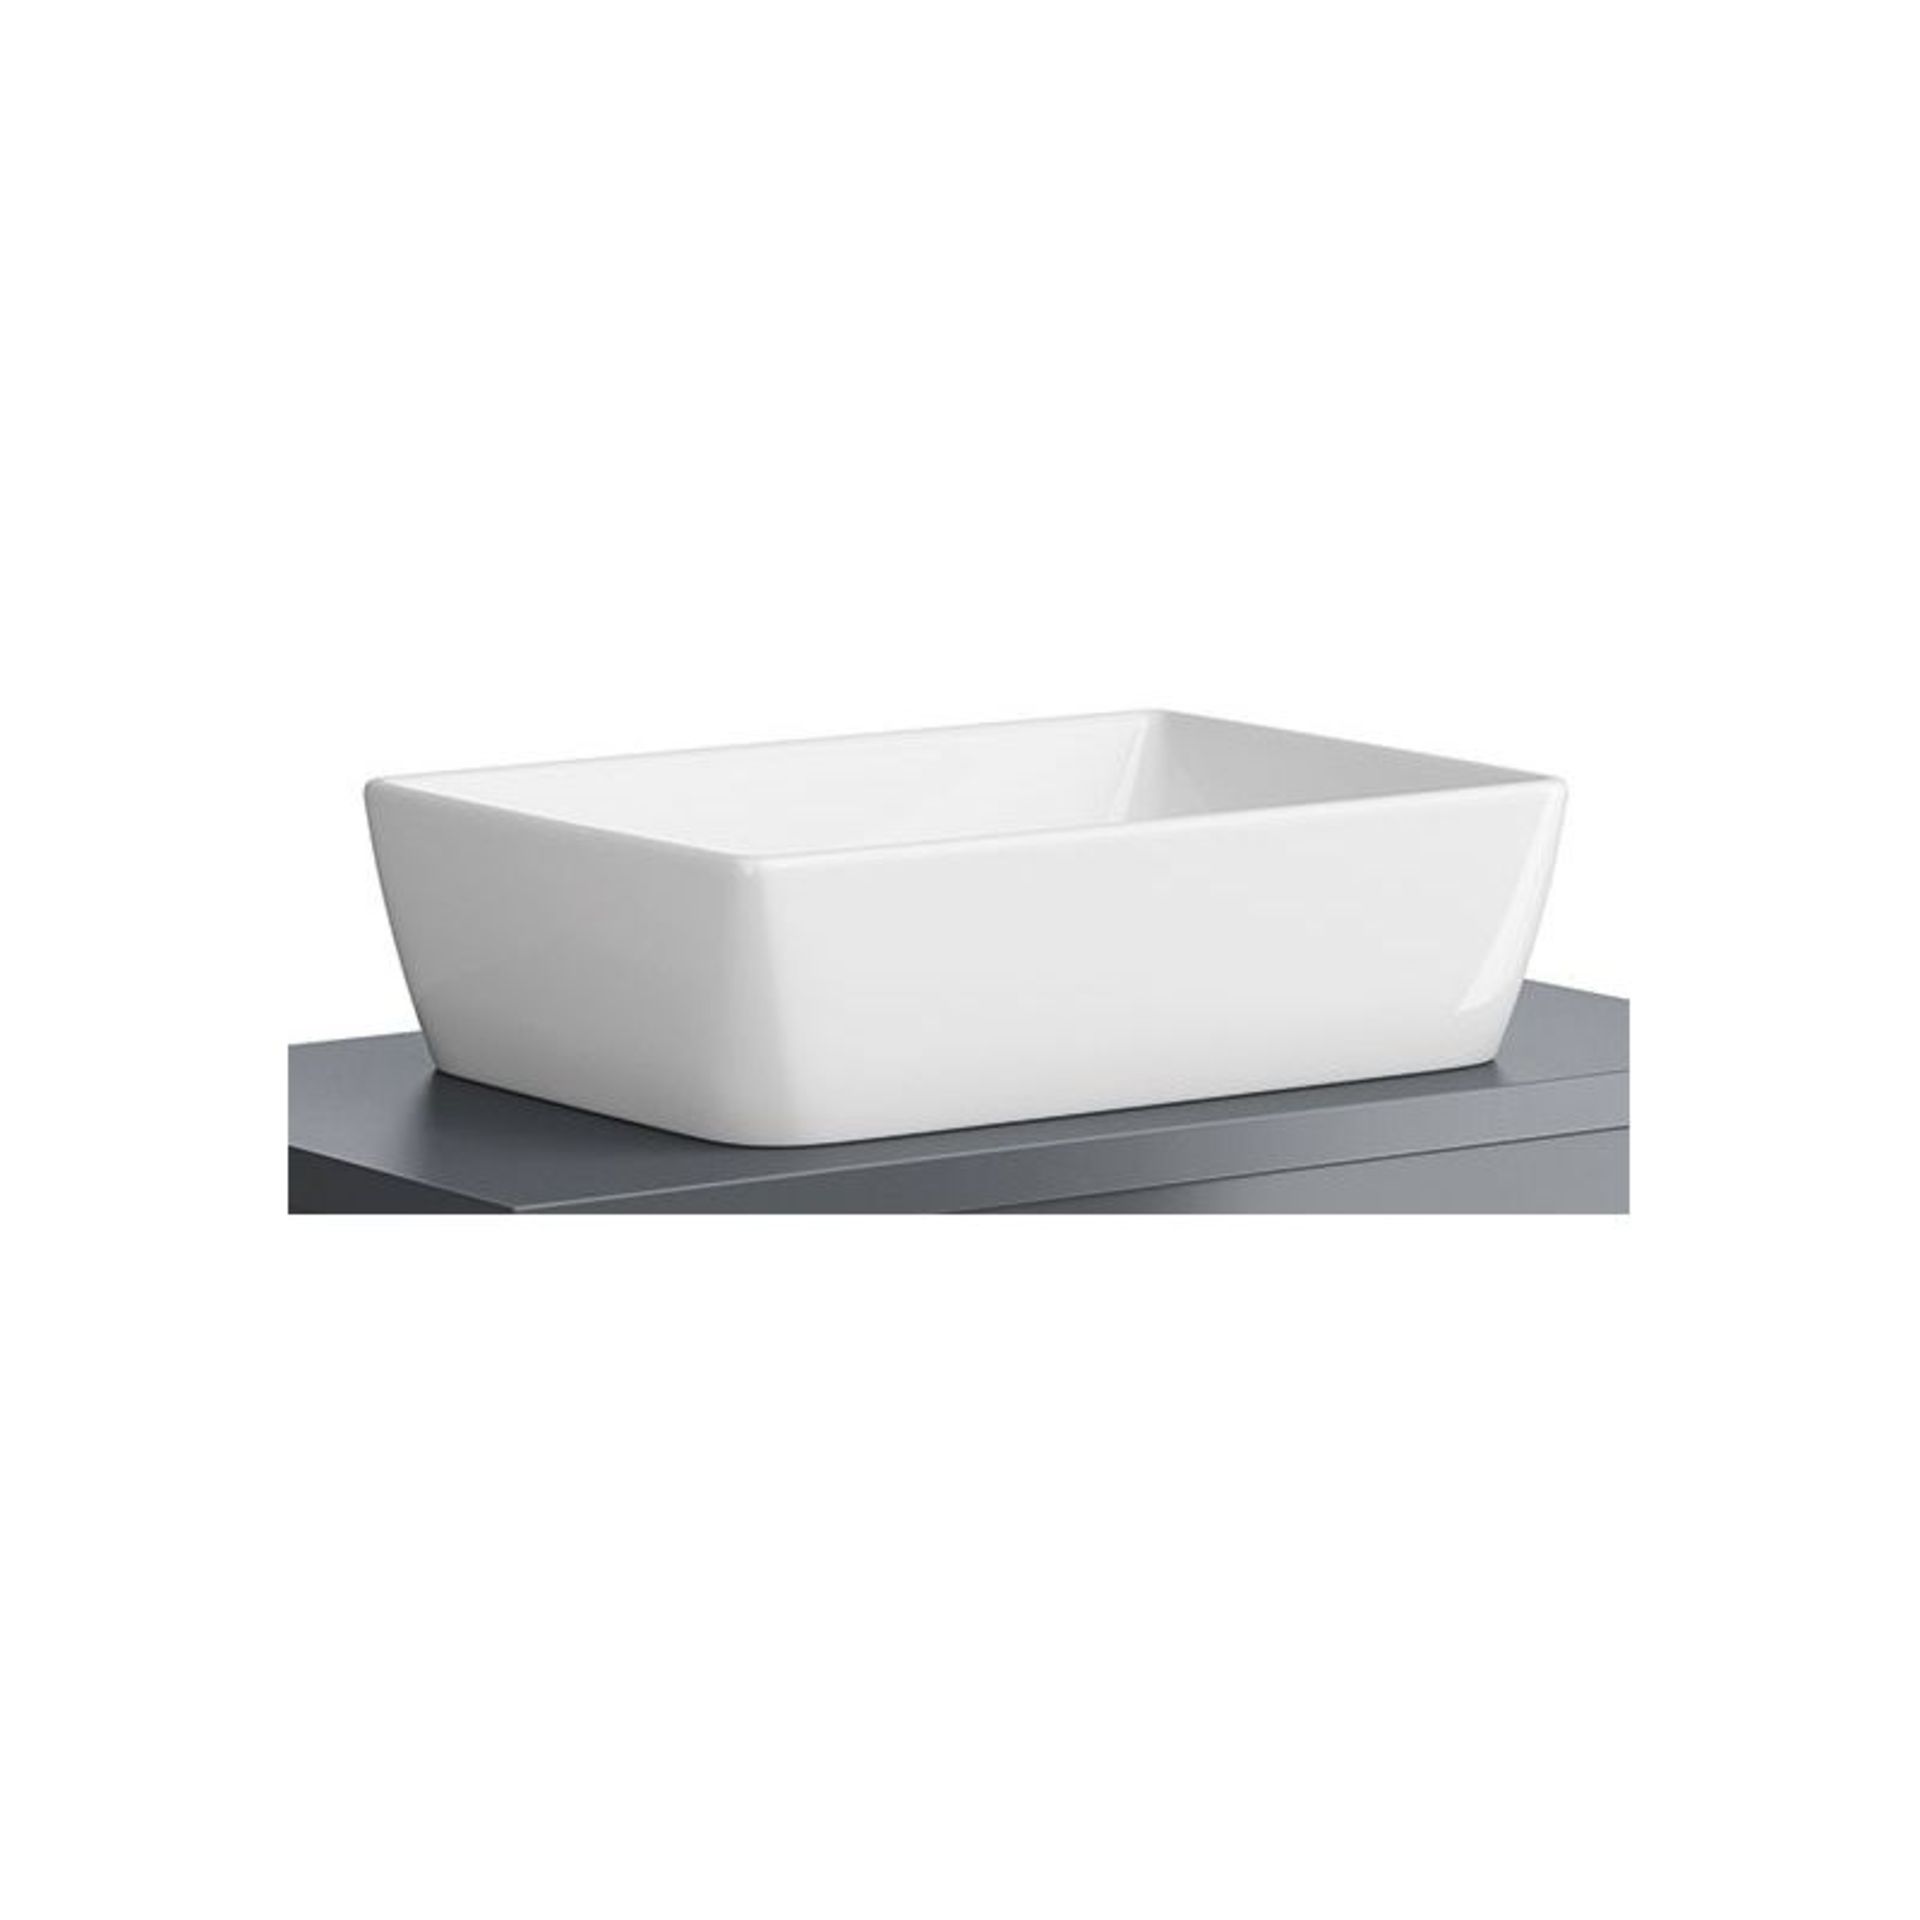 1 x Synergy Berg Countertop Ceramic 600mm Wash Basin With Free Flow Waste - New Stock - RRP £133 - Image 2 of 6